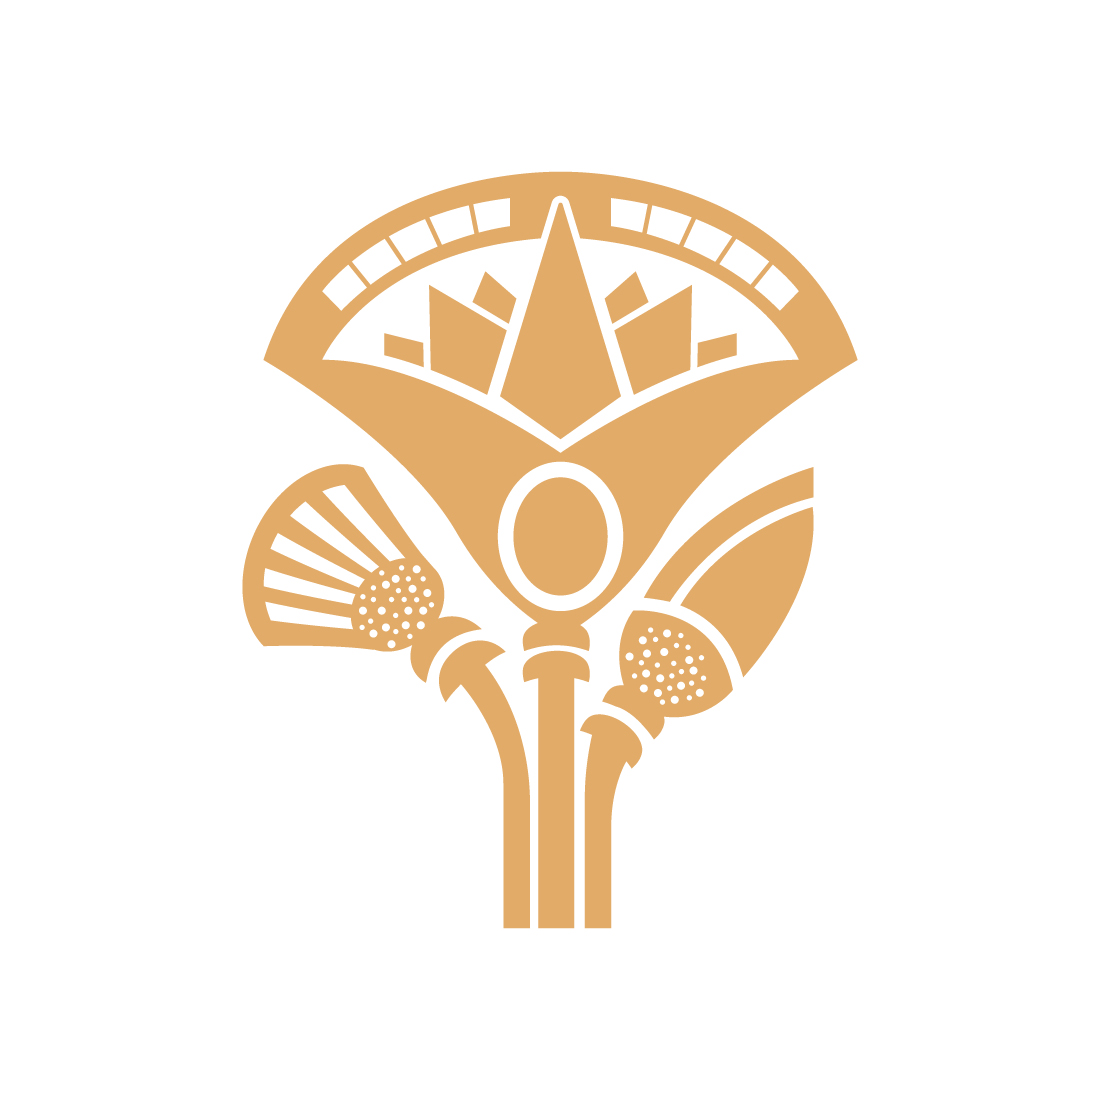 Egyptian Lotus logo design for your business preview image.